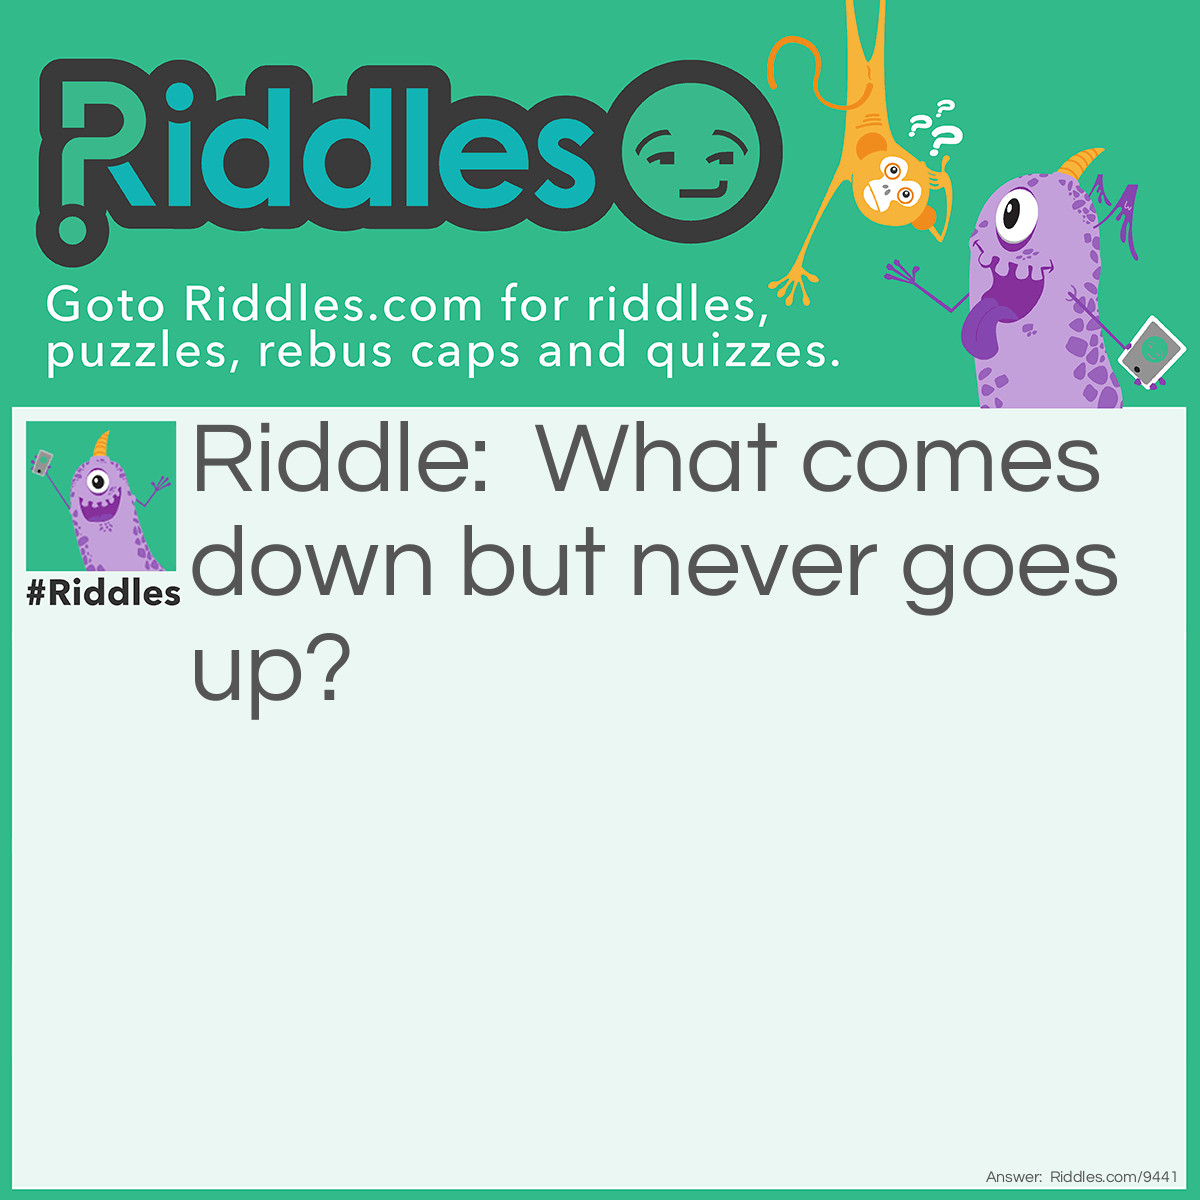 Riddle: What comes down but never goes up? Answer: Rain.